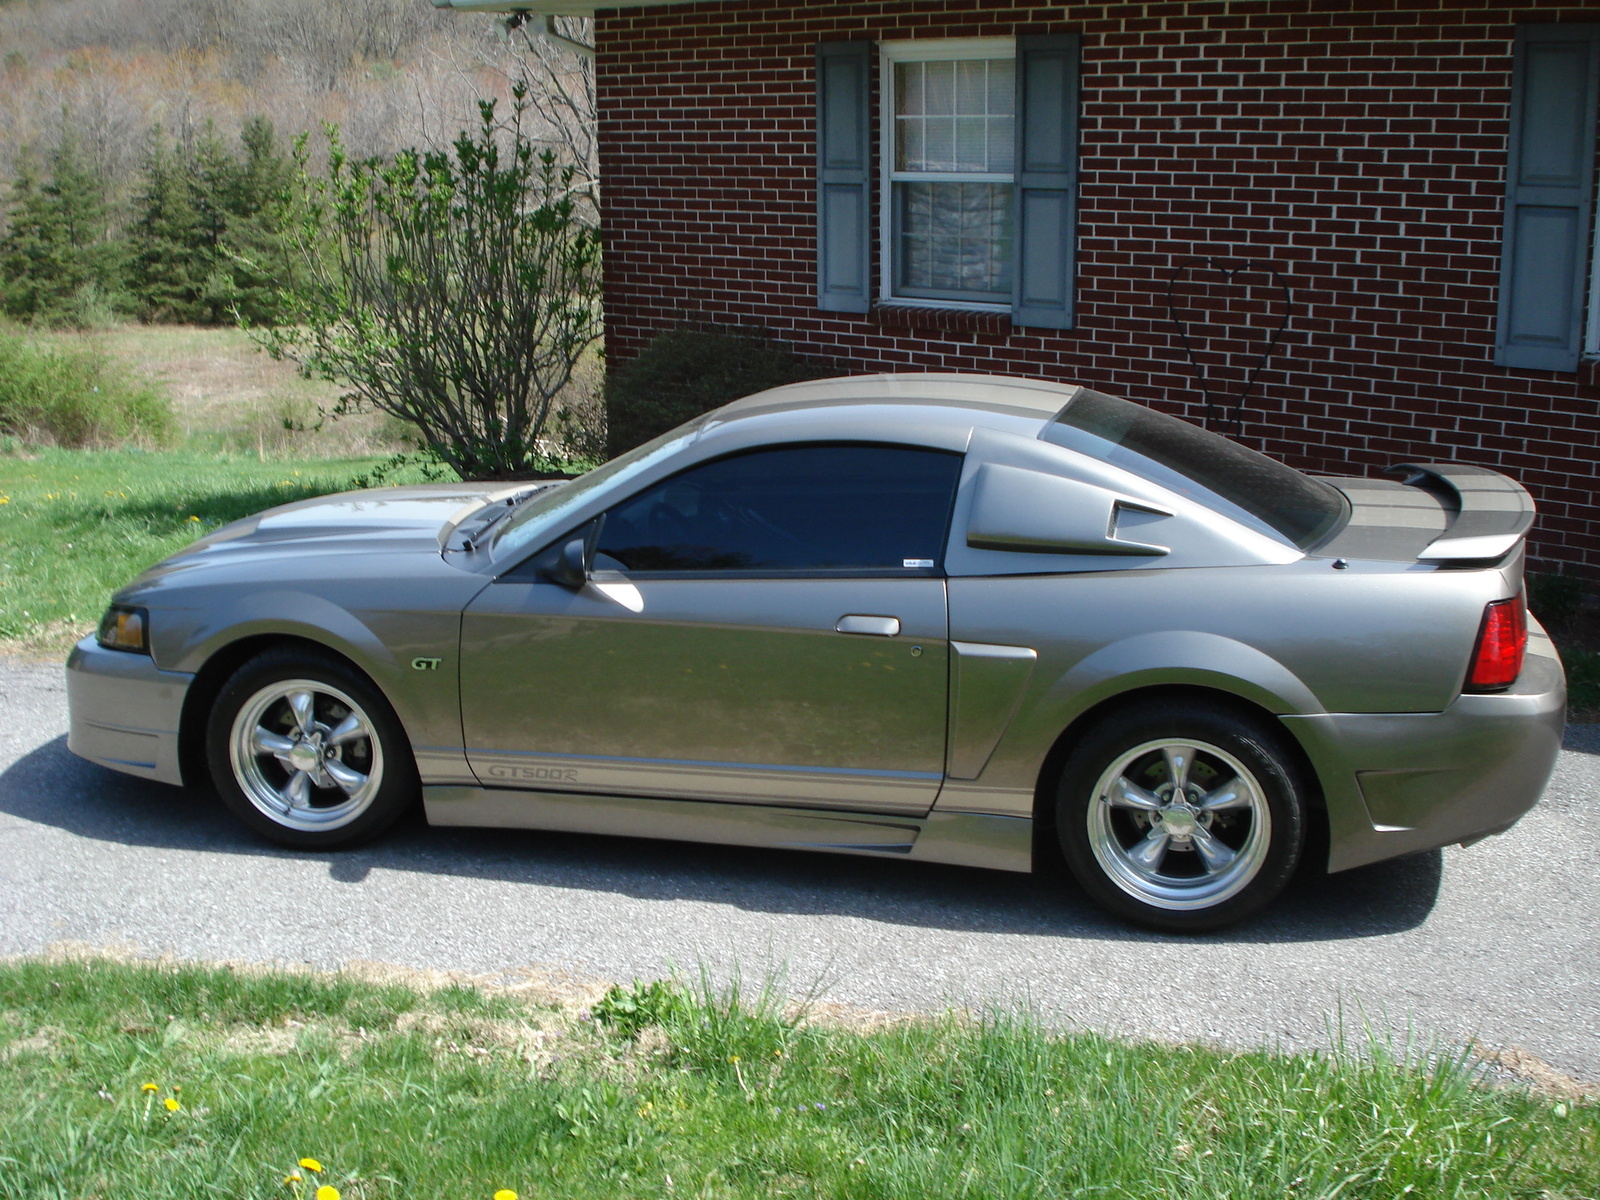 2002 Ford mustang gt deluxe review #5